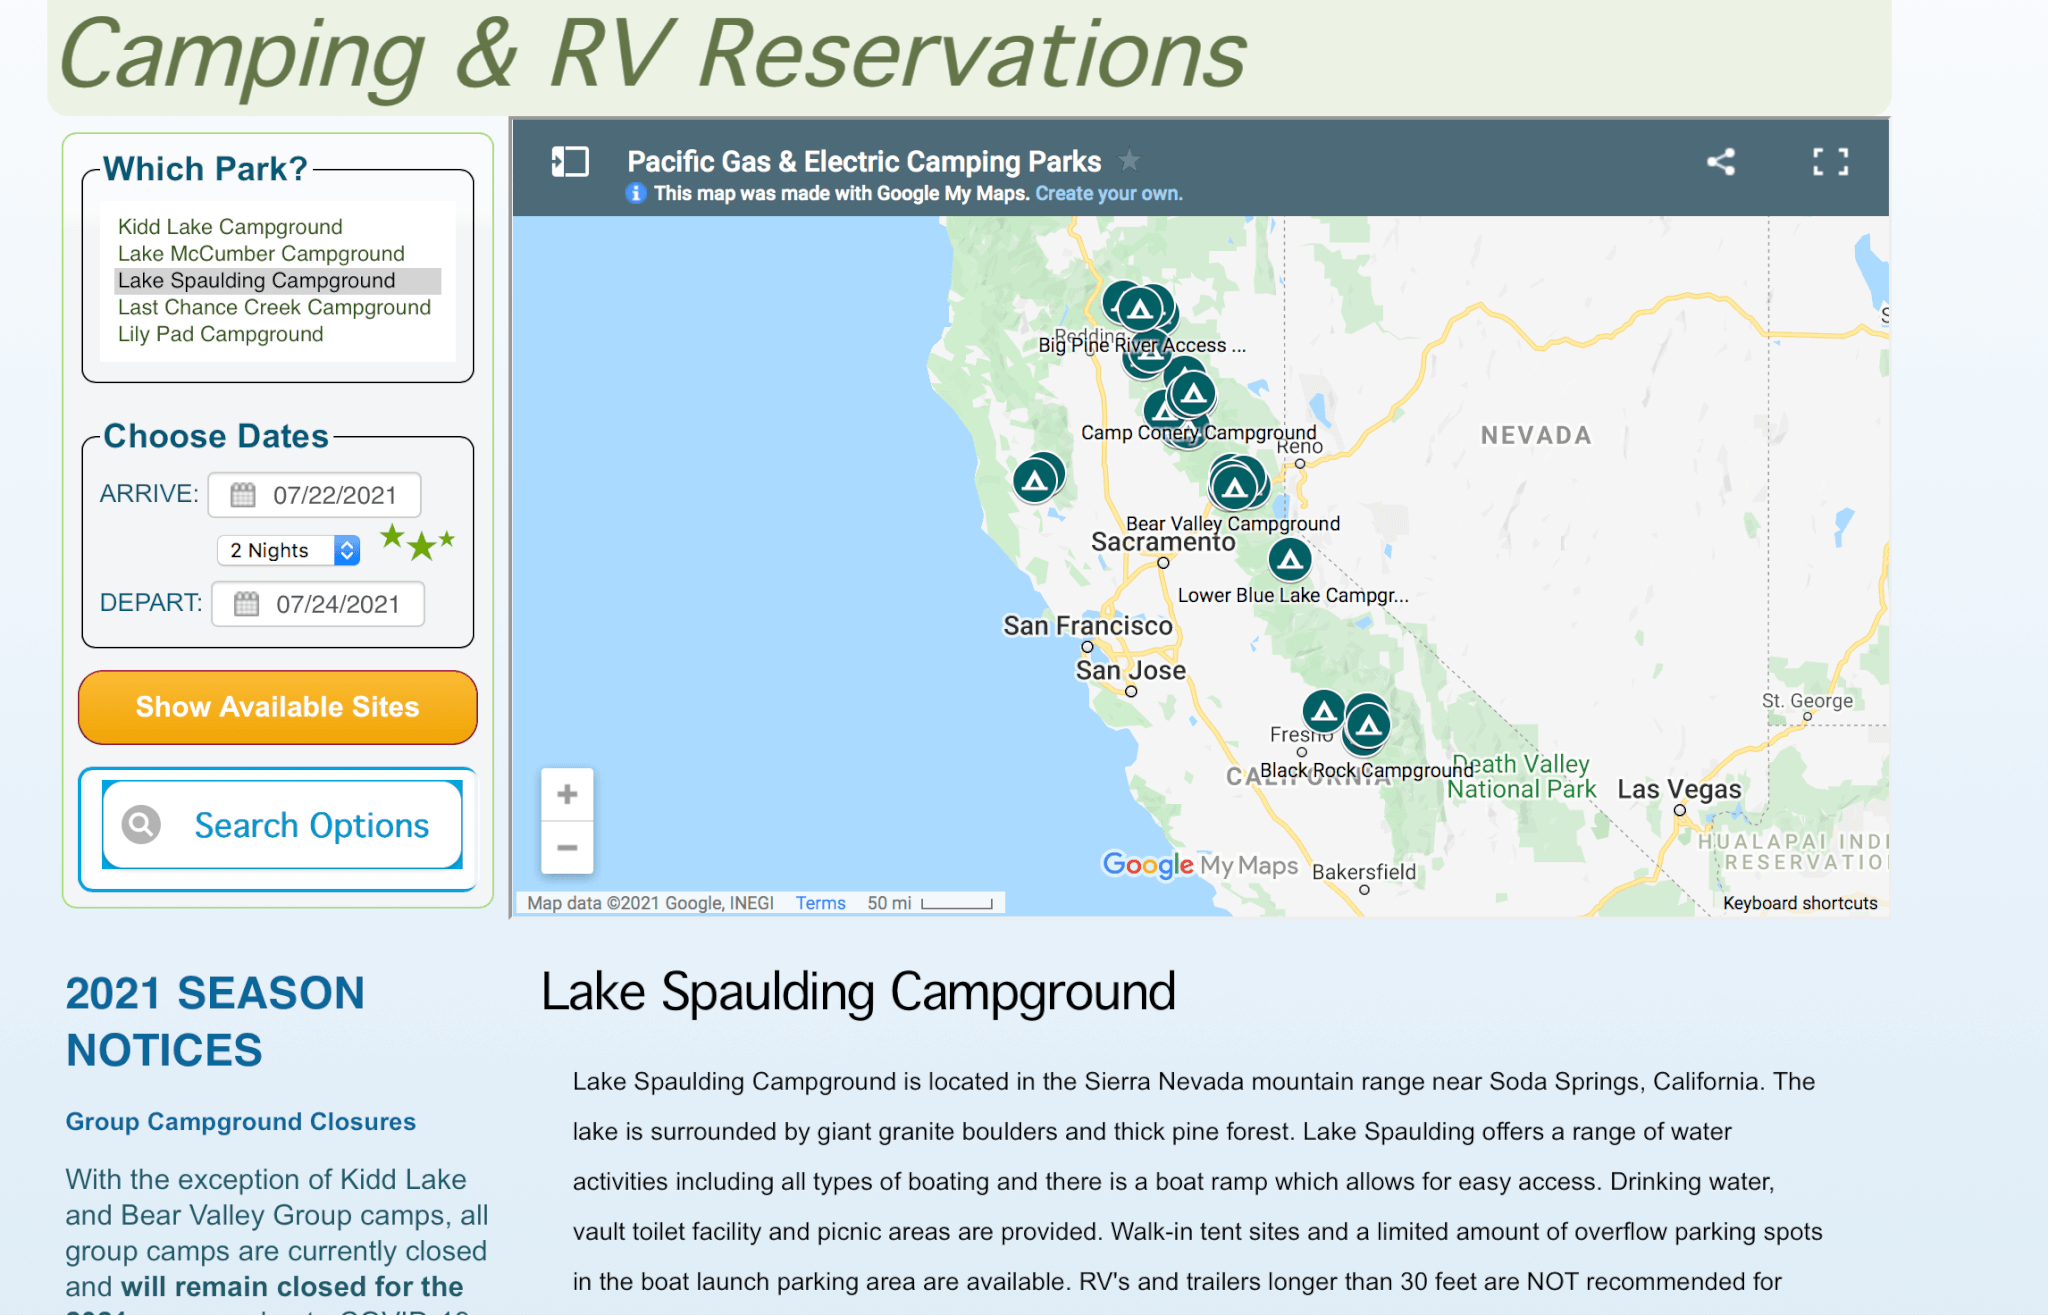 Lake Spaulding Campground reservations